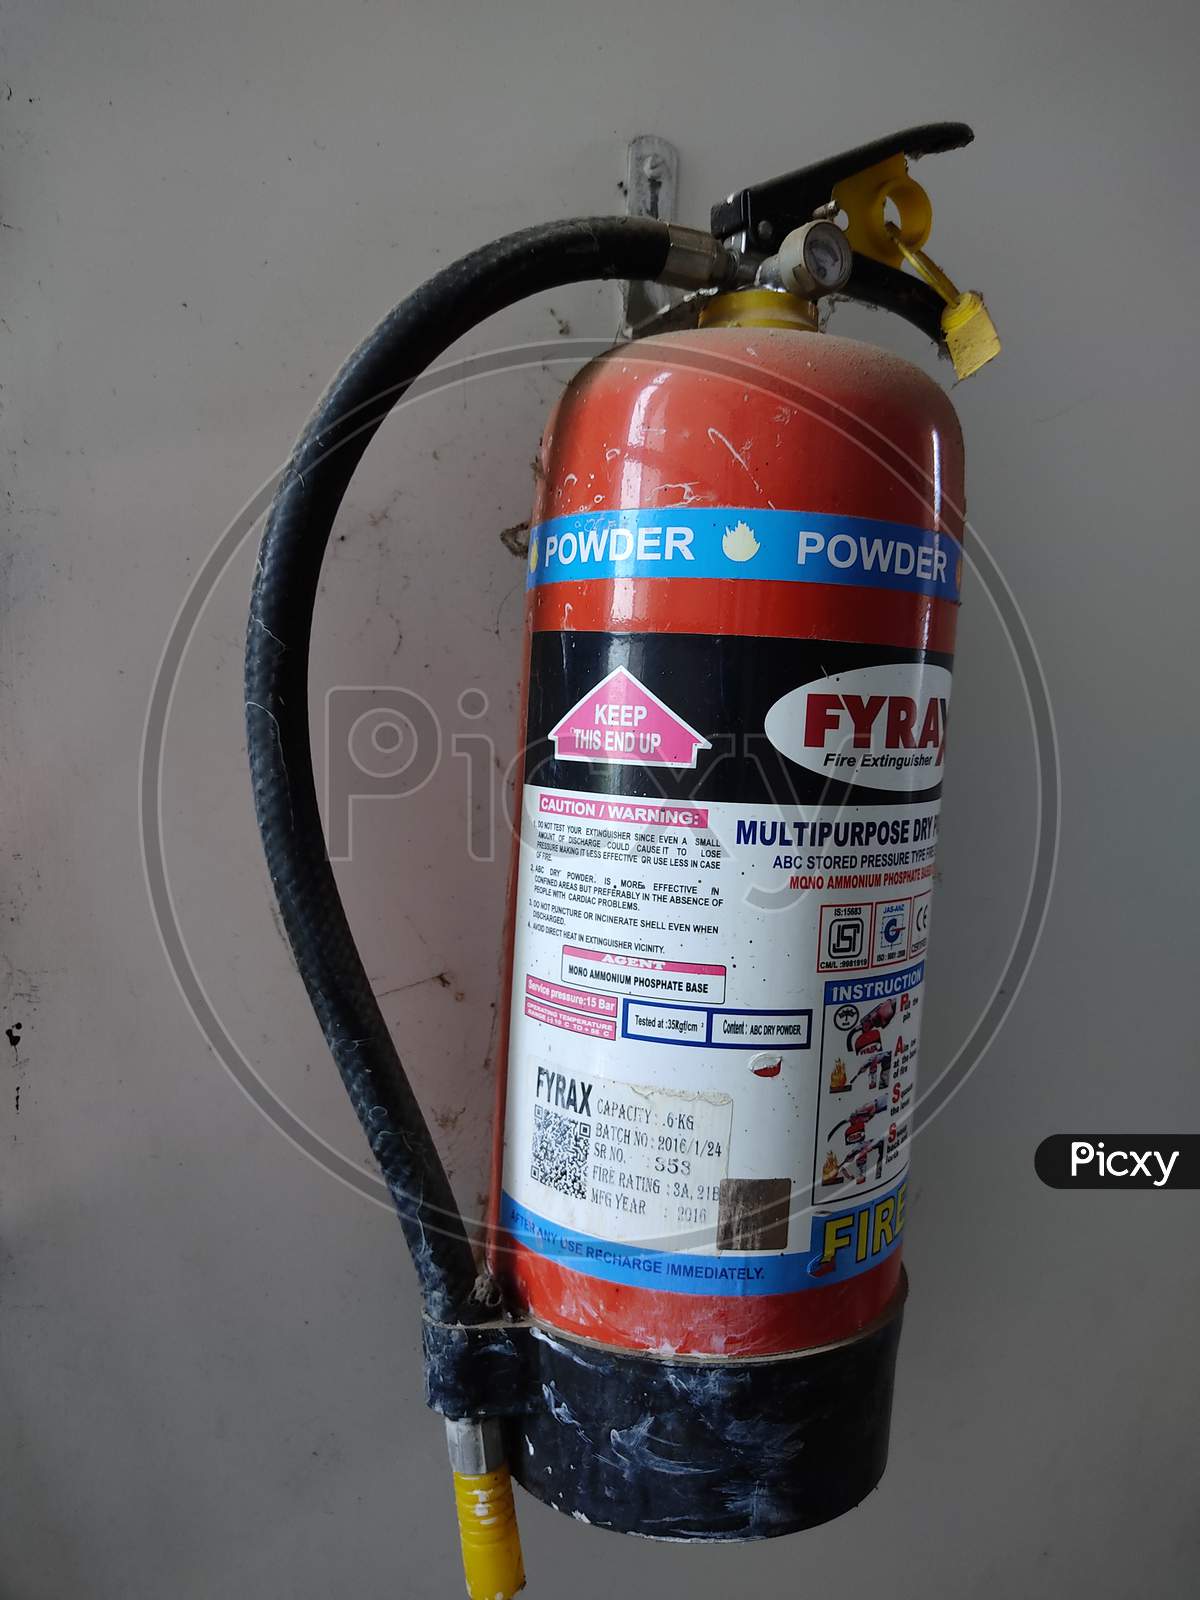 Fire extinguisher portable hanged for fire safety